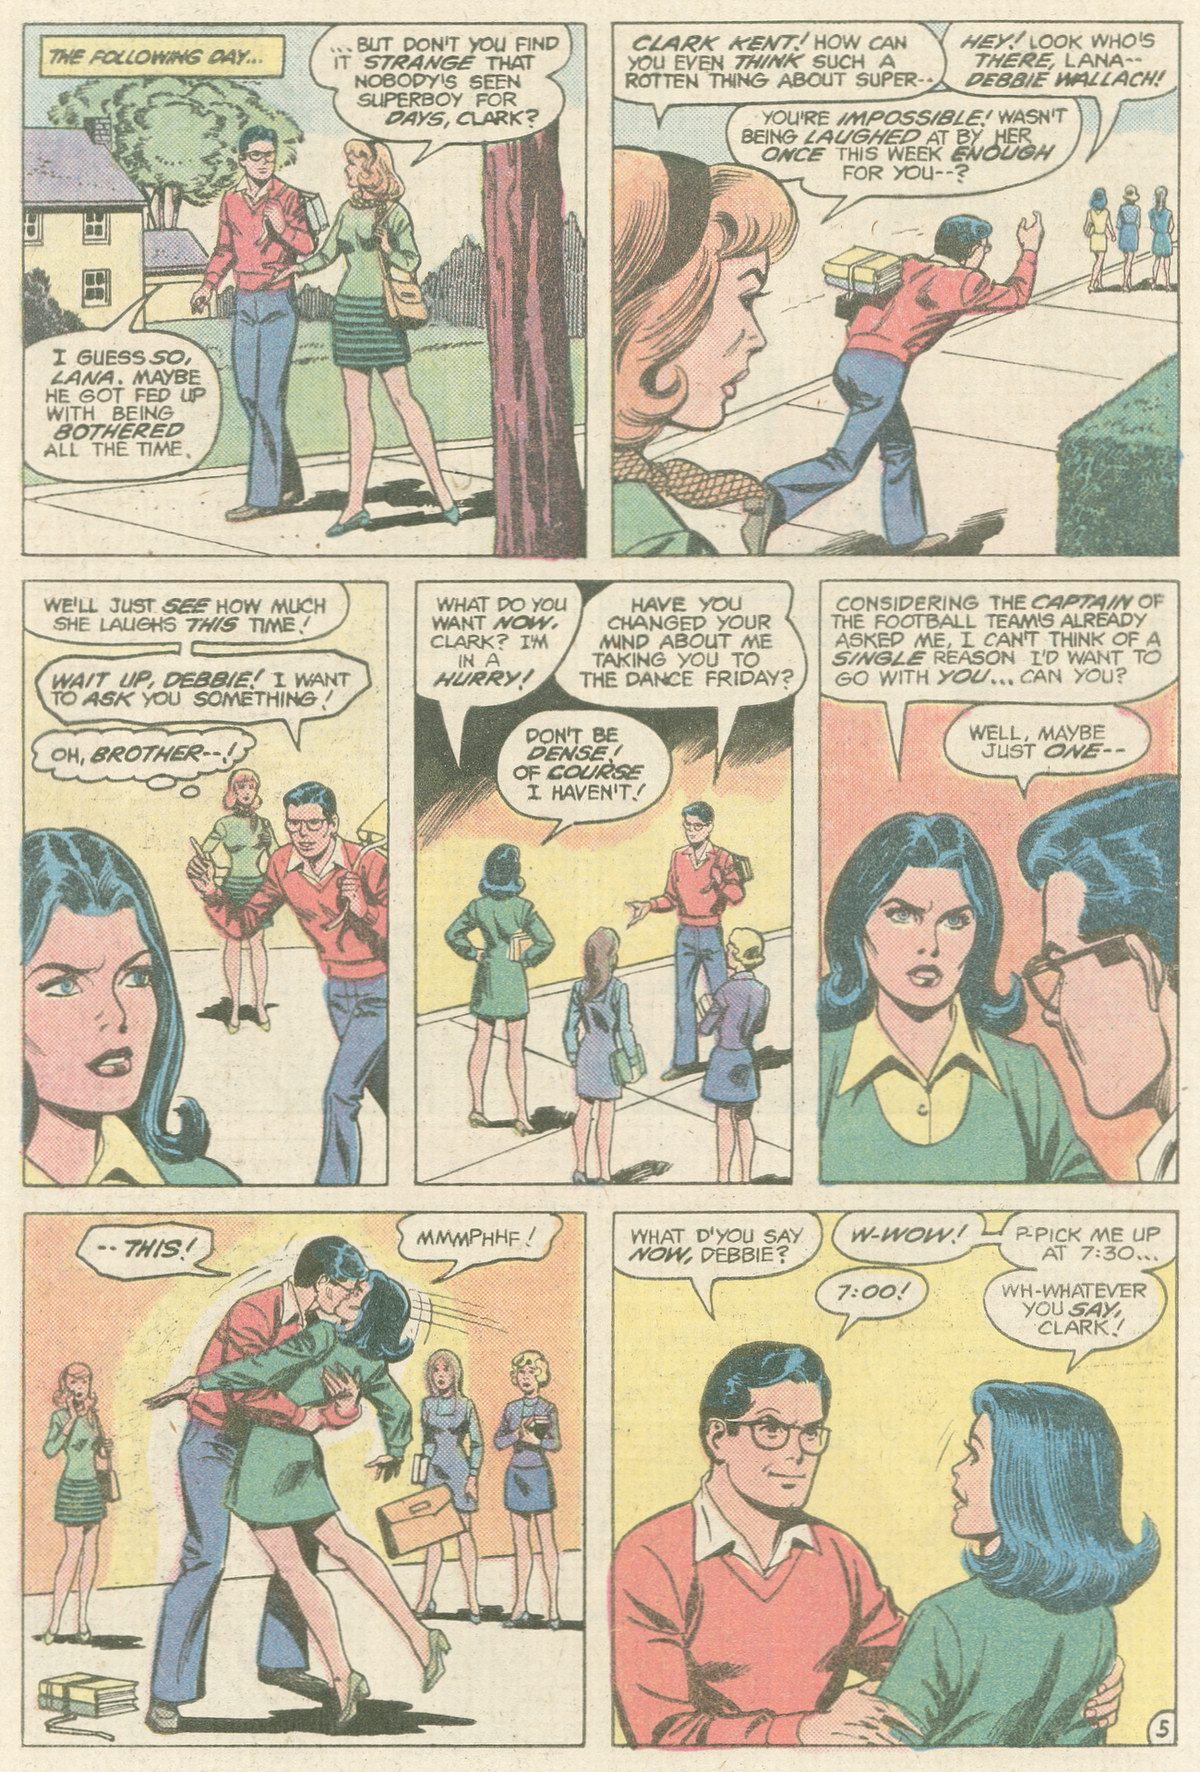 The New Adventures of Superboy 41 Page 5